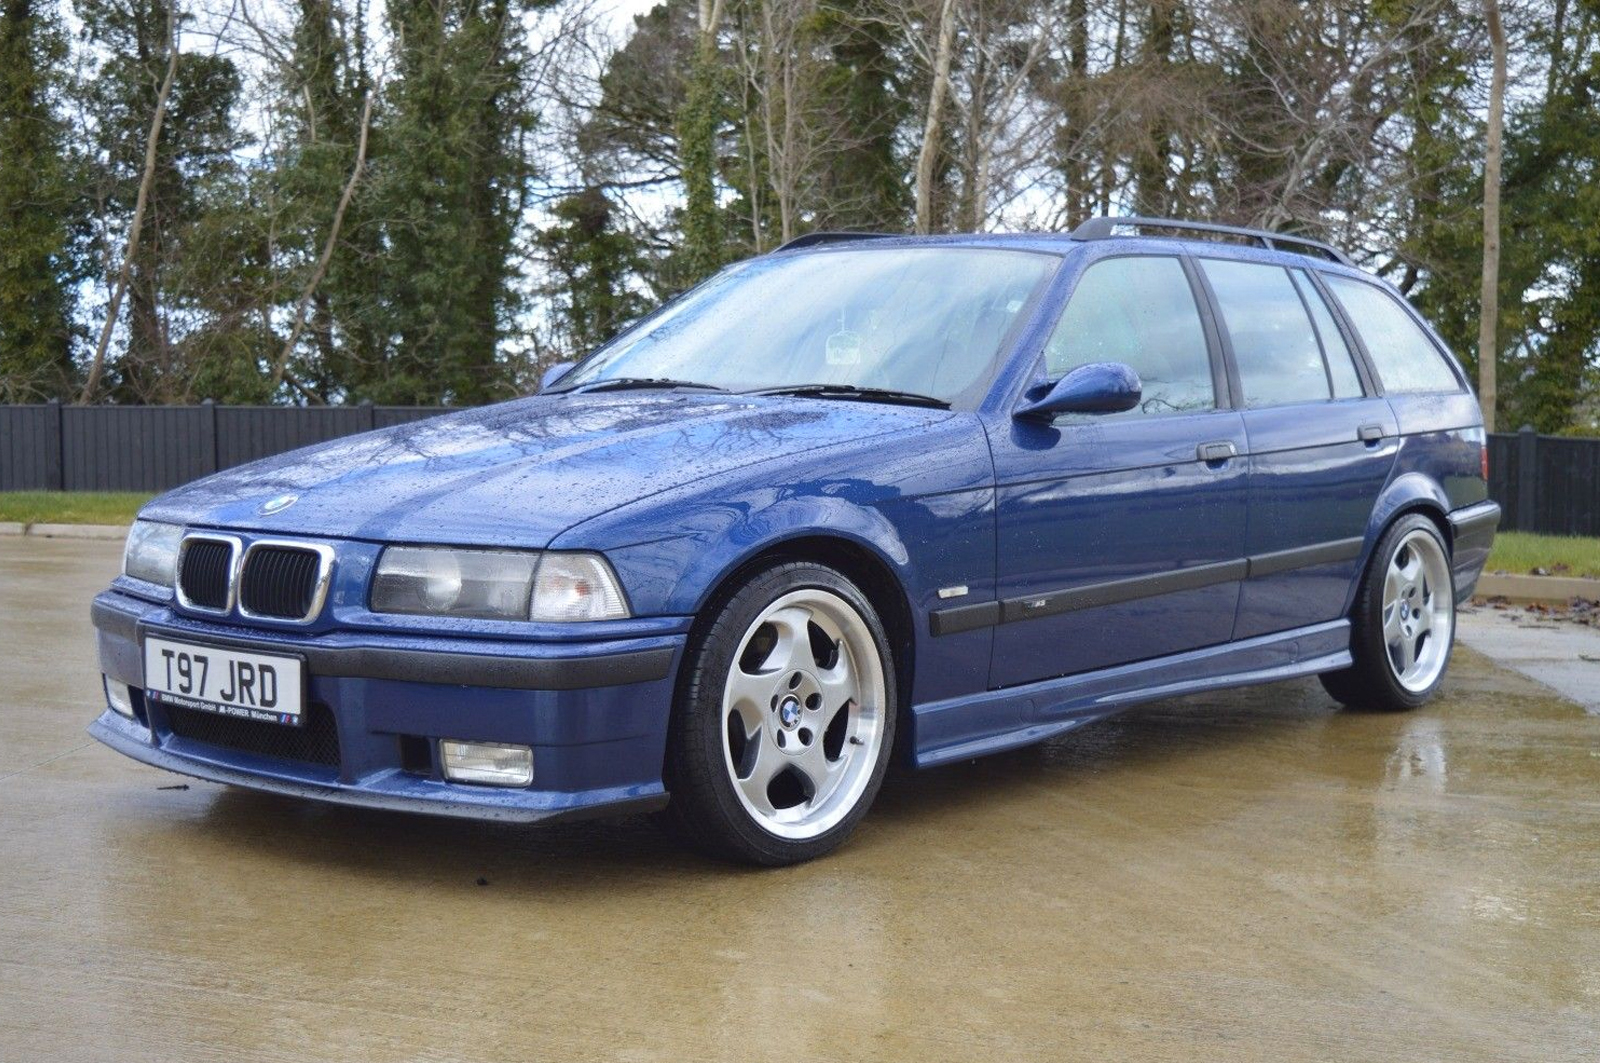 laag personeelszaken grot The coolest car on eBay right now – BMW E36 M3 Touring | Good Shout Media |  Automotive Marketing Specialist